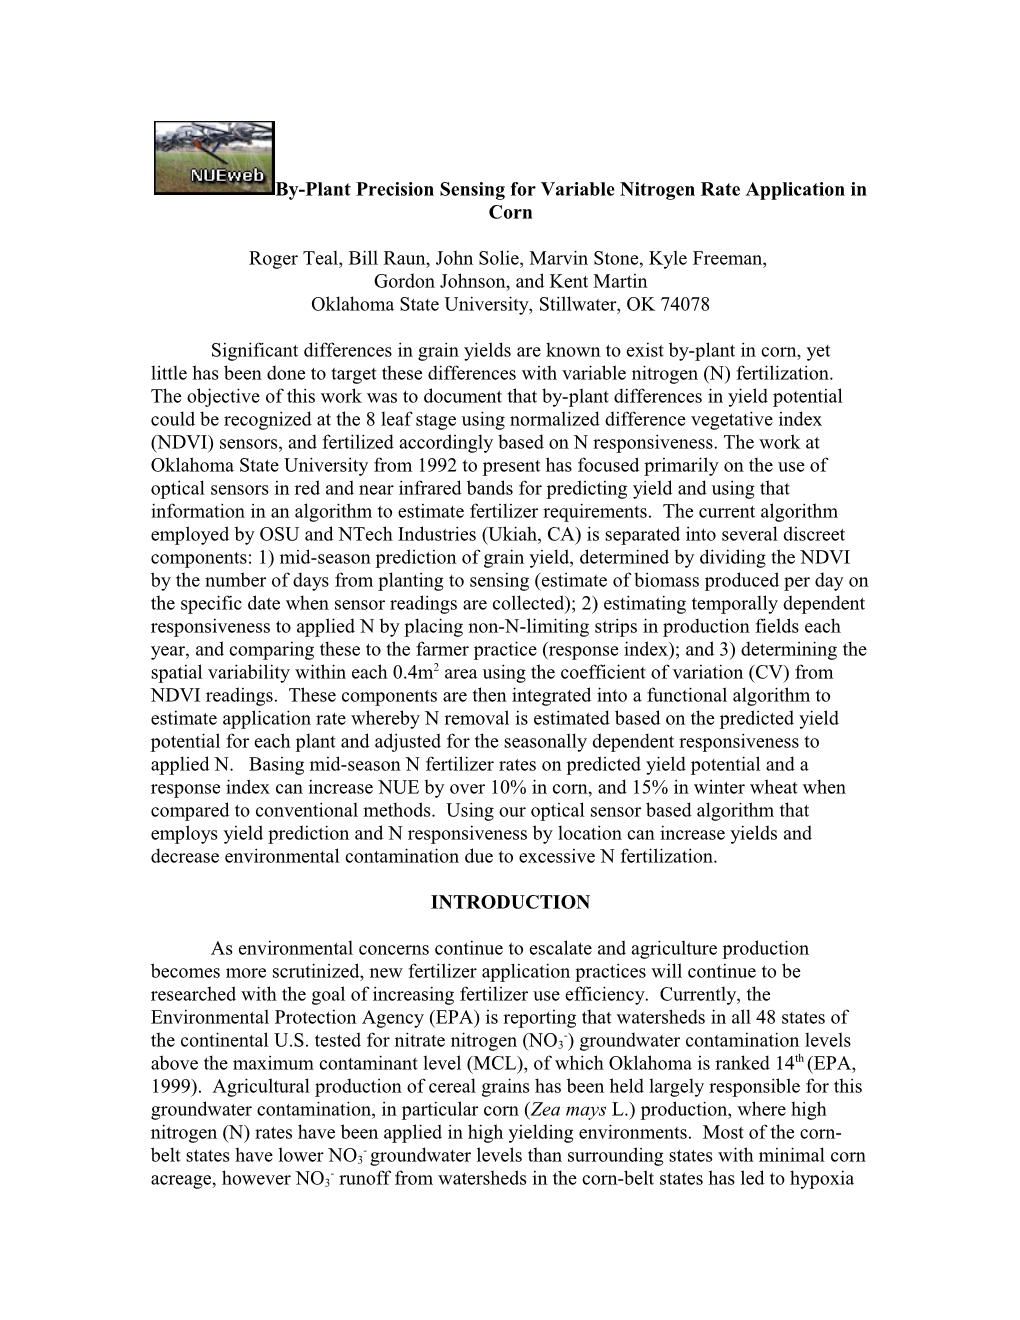 By-Plant Precision Sensing for Variable Nitrogen Rate Application in Corn